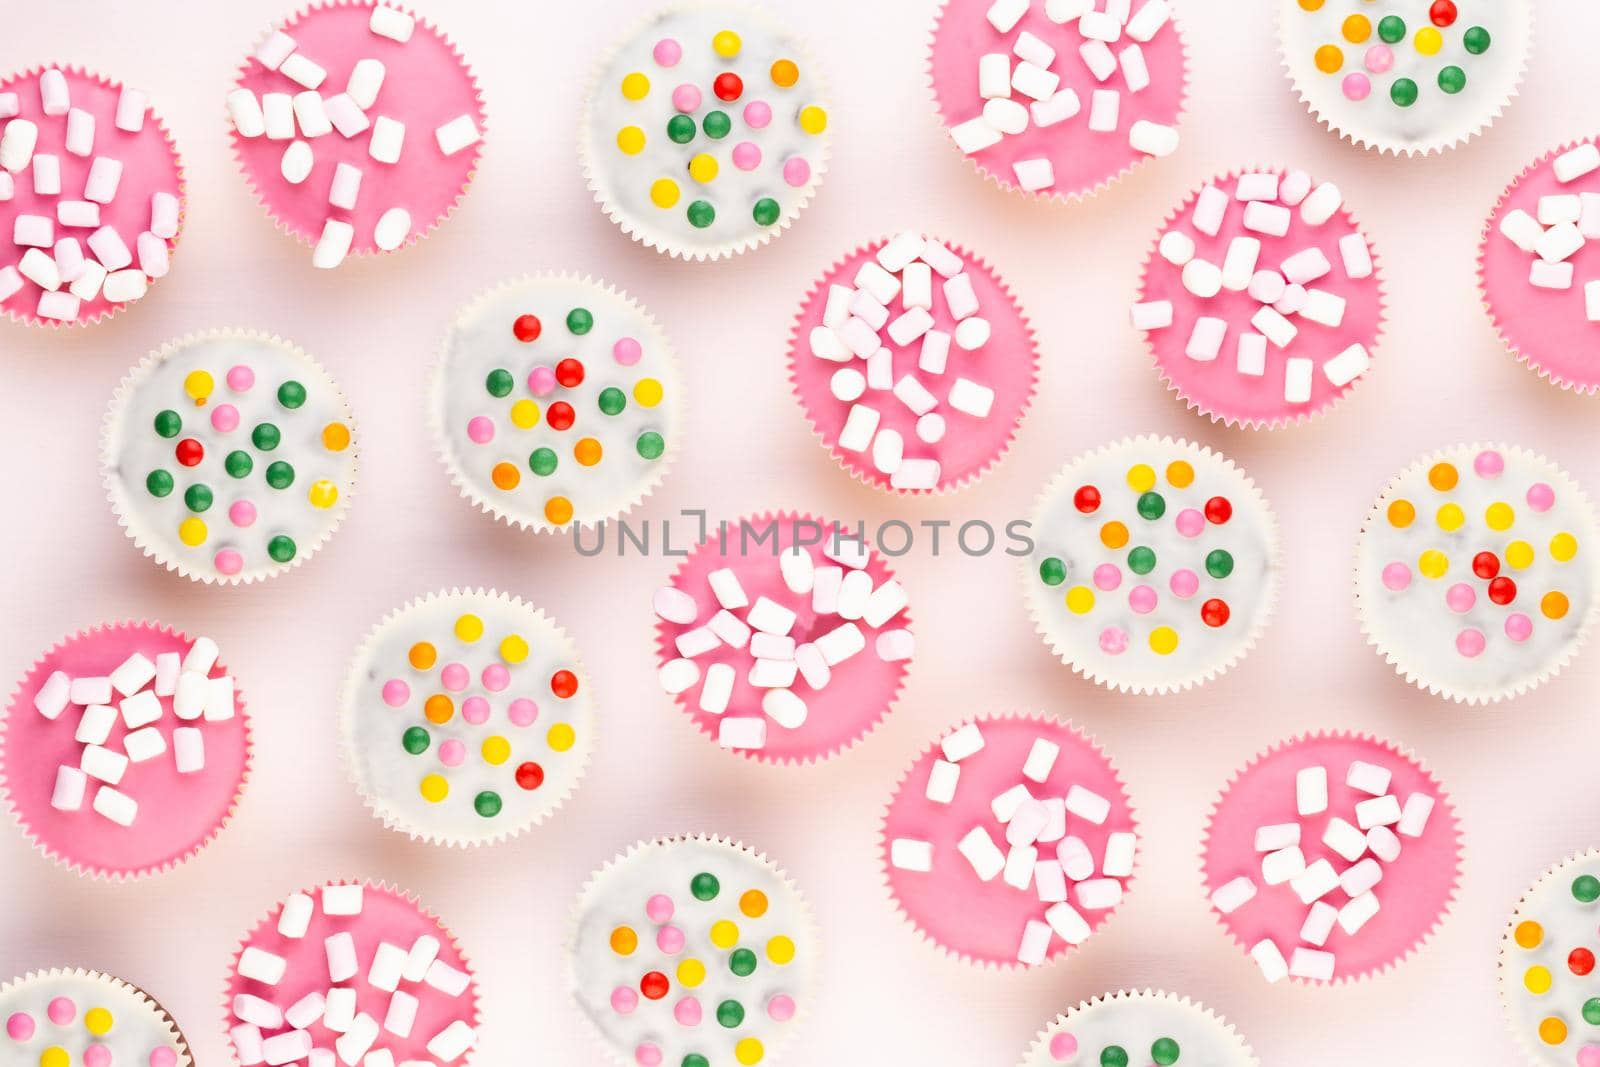 Multiple colorful nicely decorated muffins on a white background, top view.